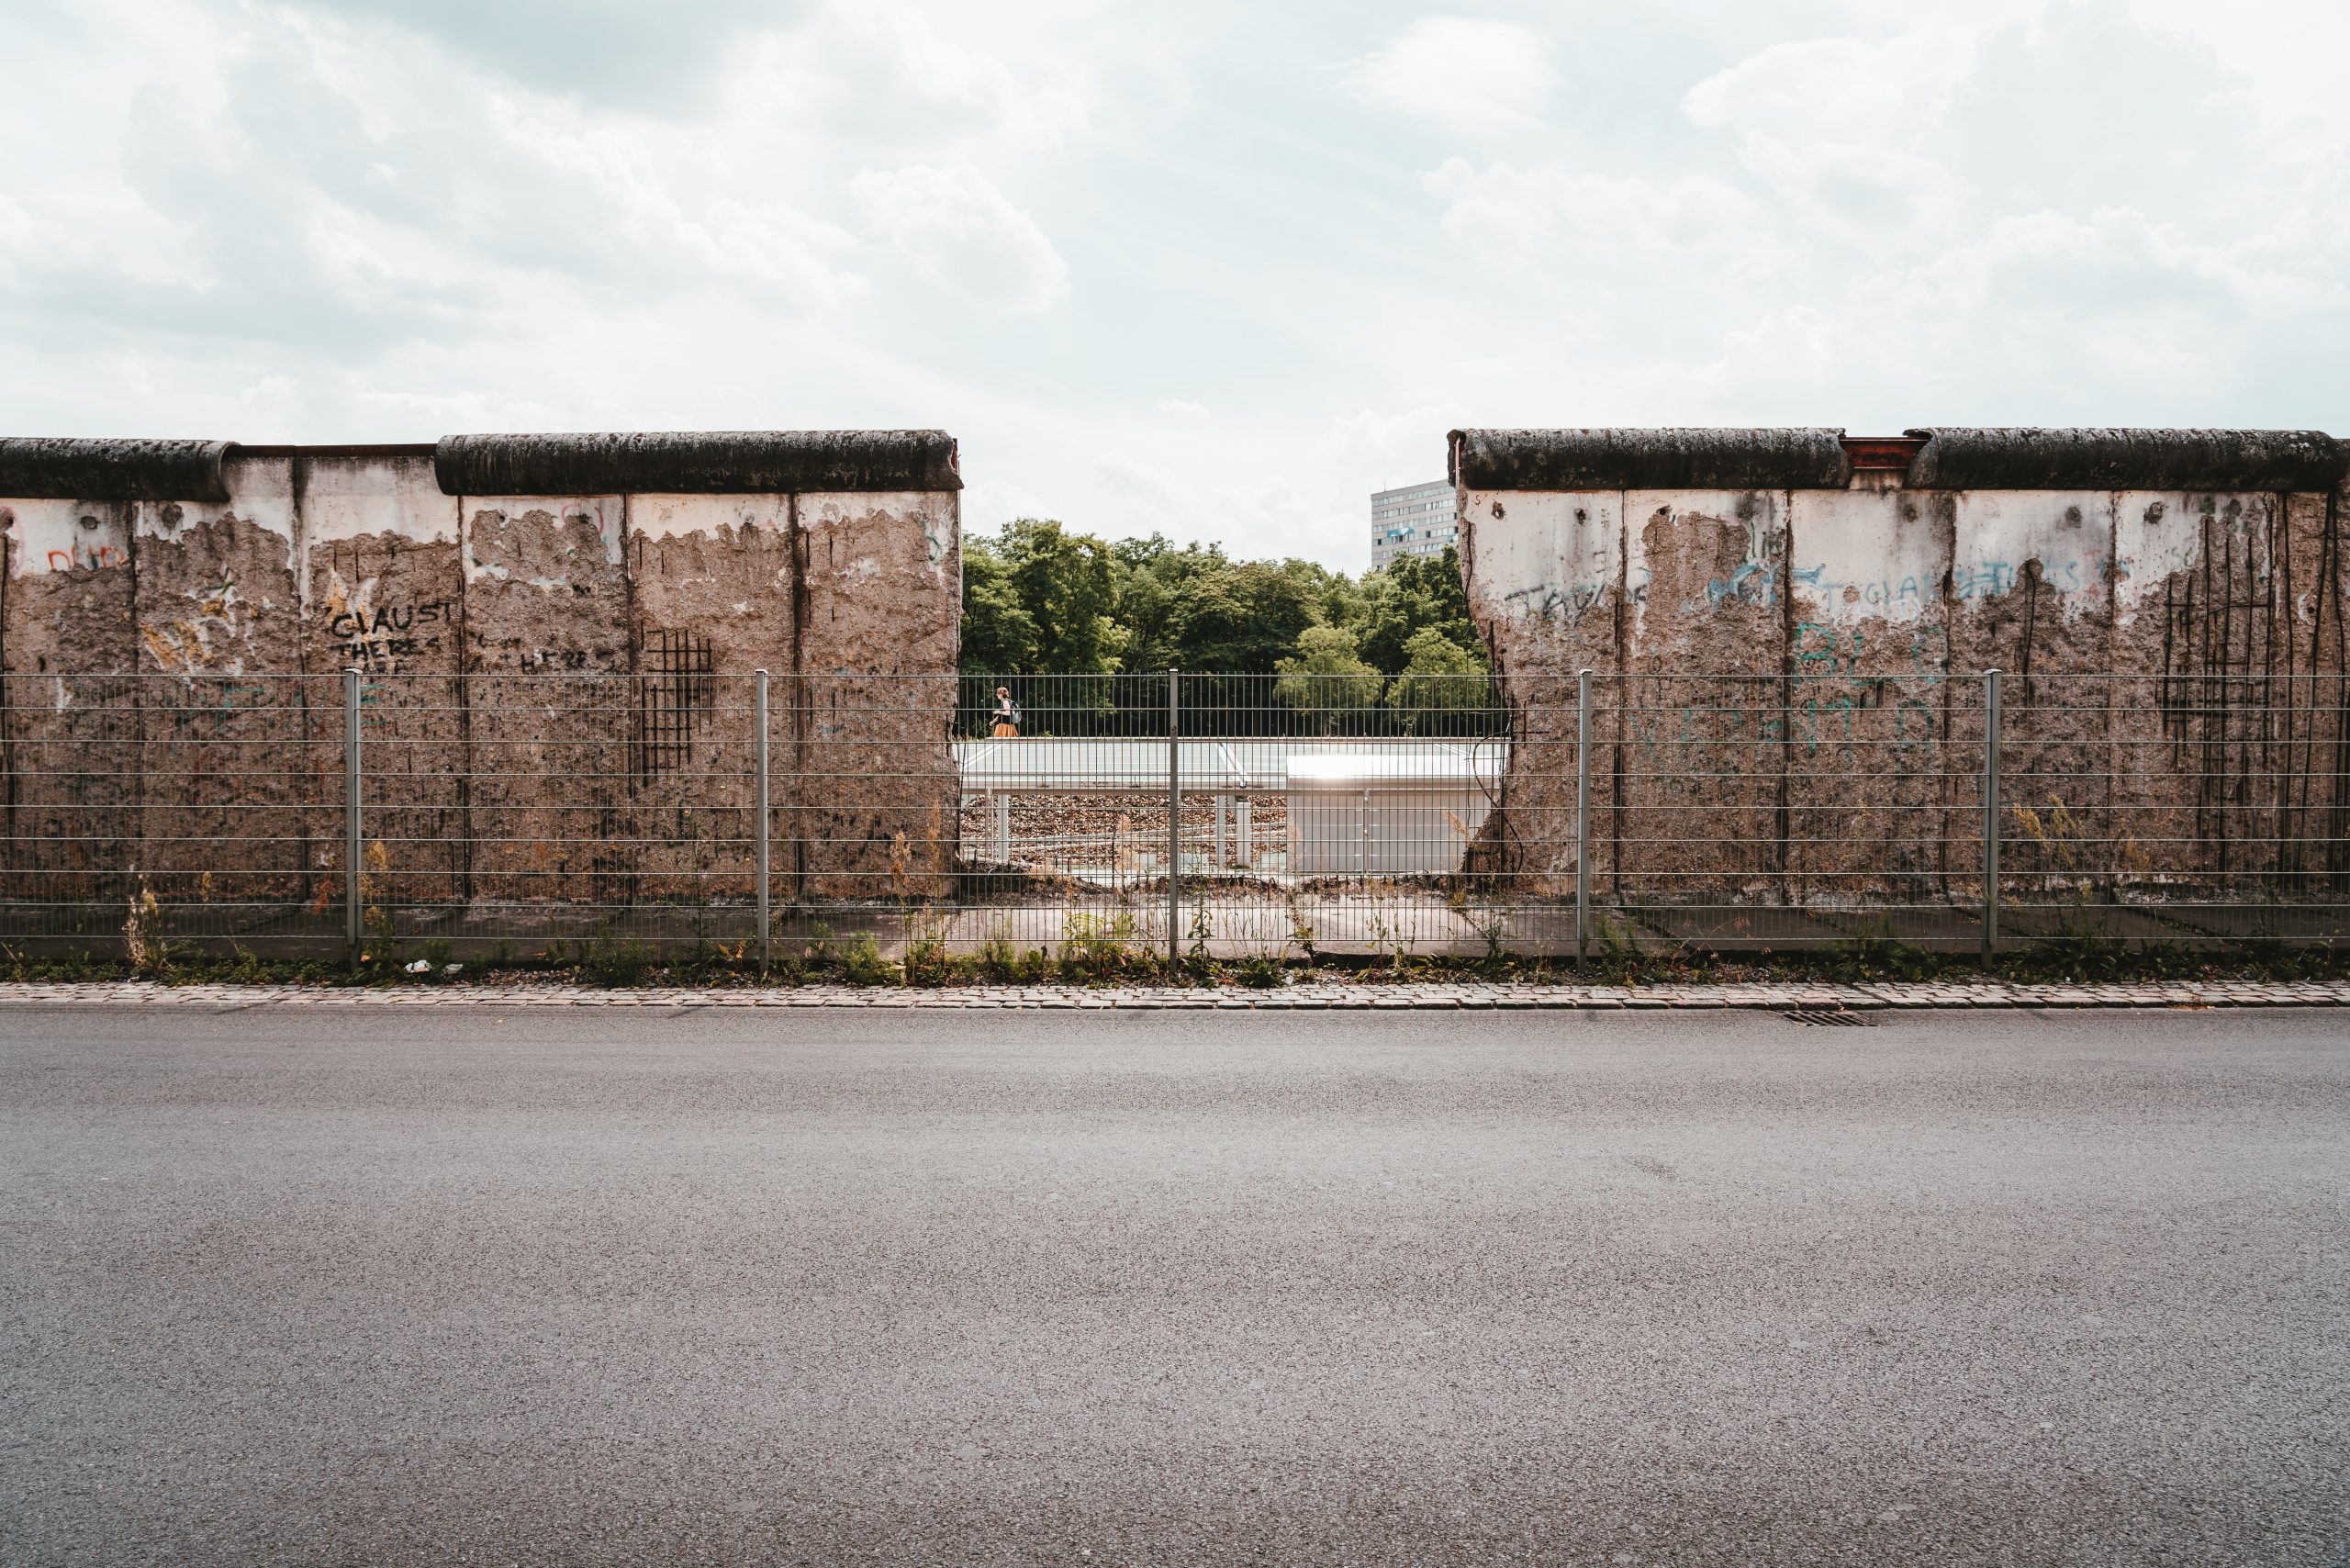 5 Bizarre Berlin Wall Escape Attempts You Never Knew About